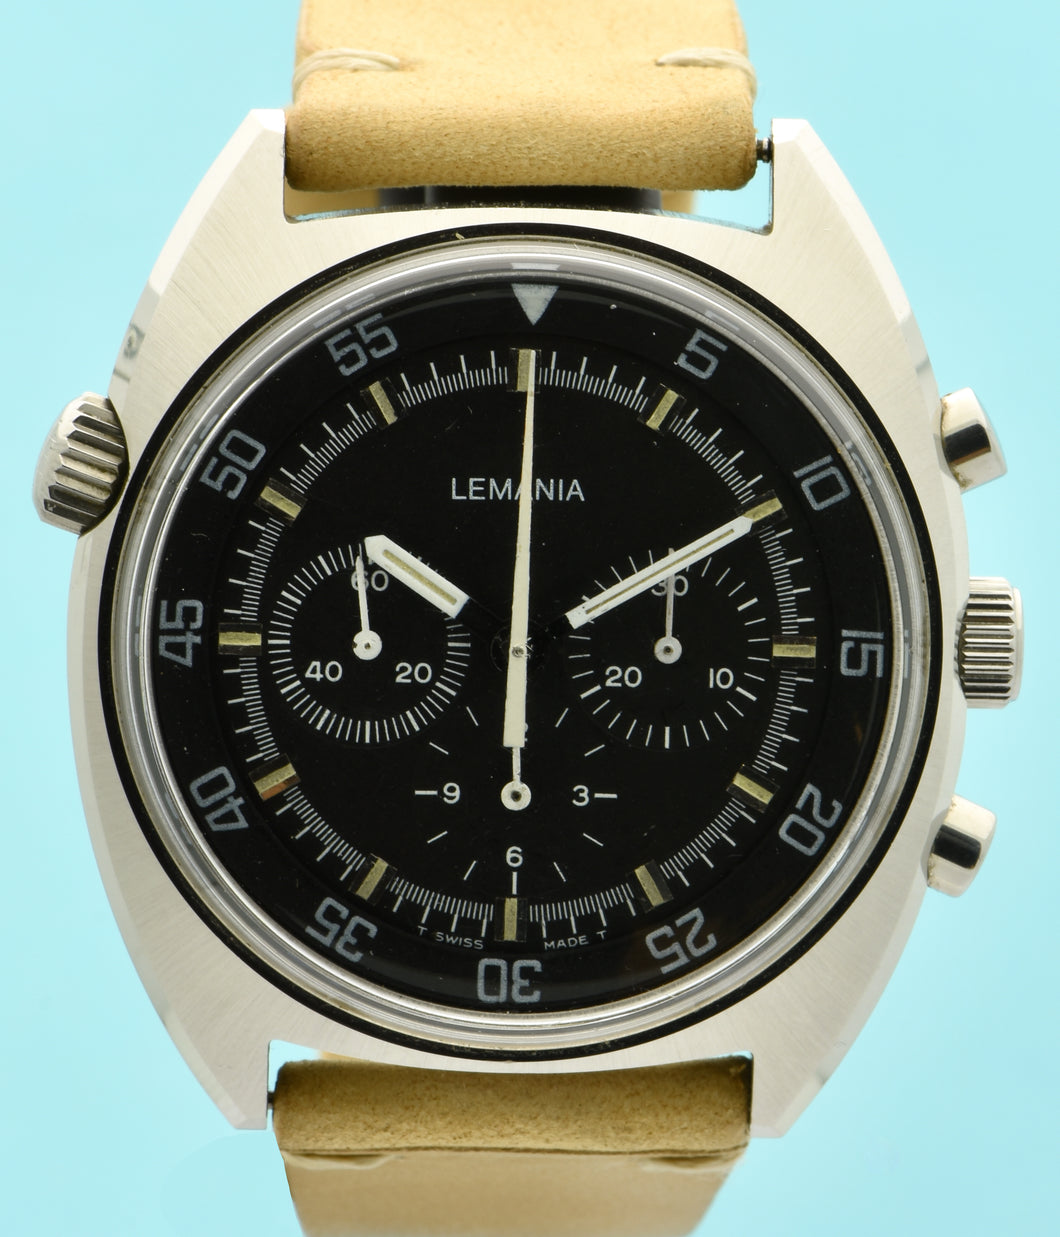 Lemania Chronograph in Stainless Steel, Ref. 9658